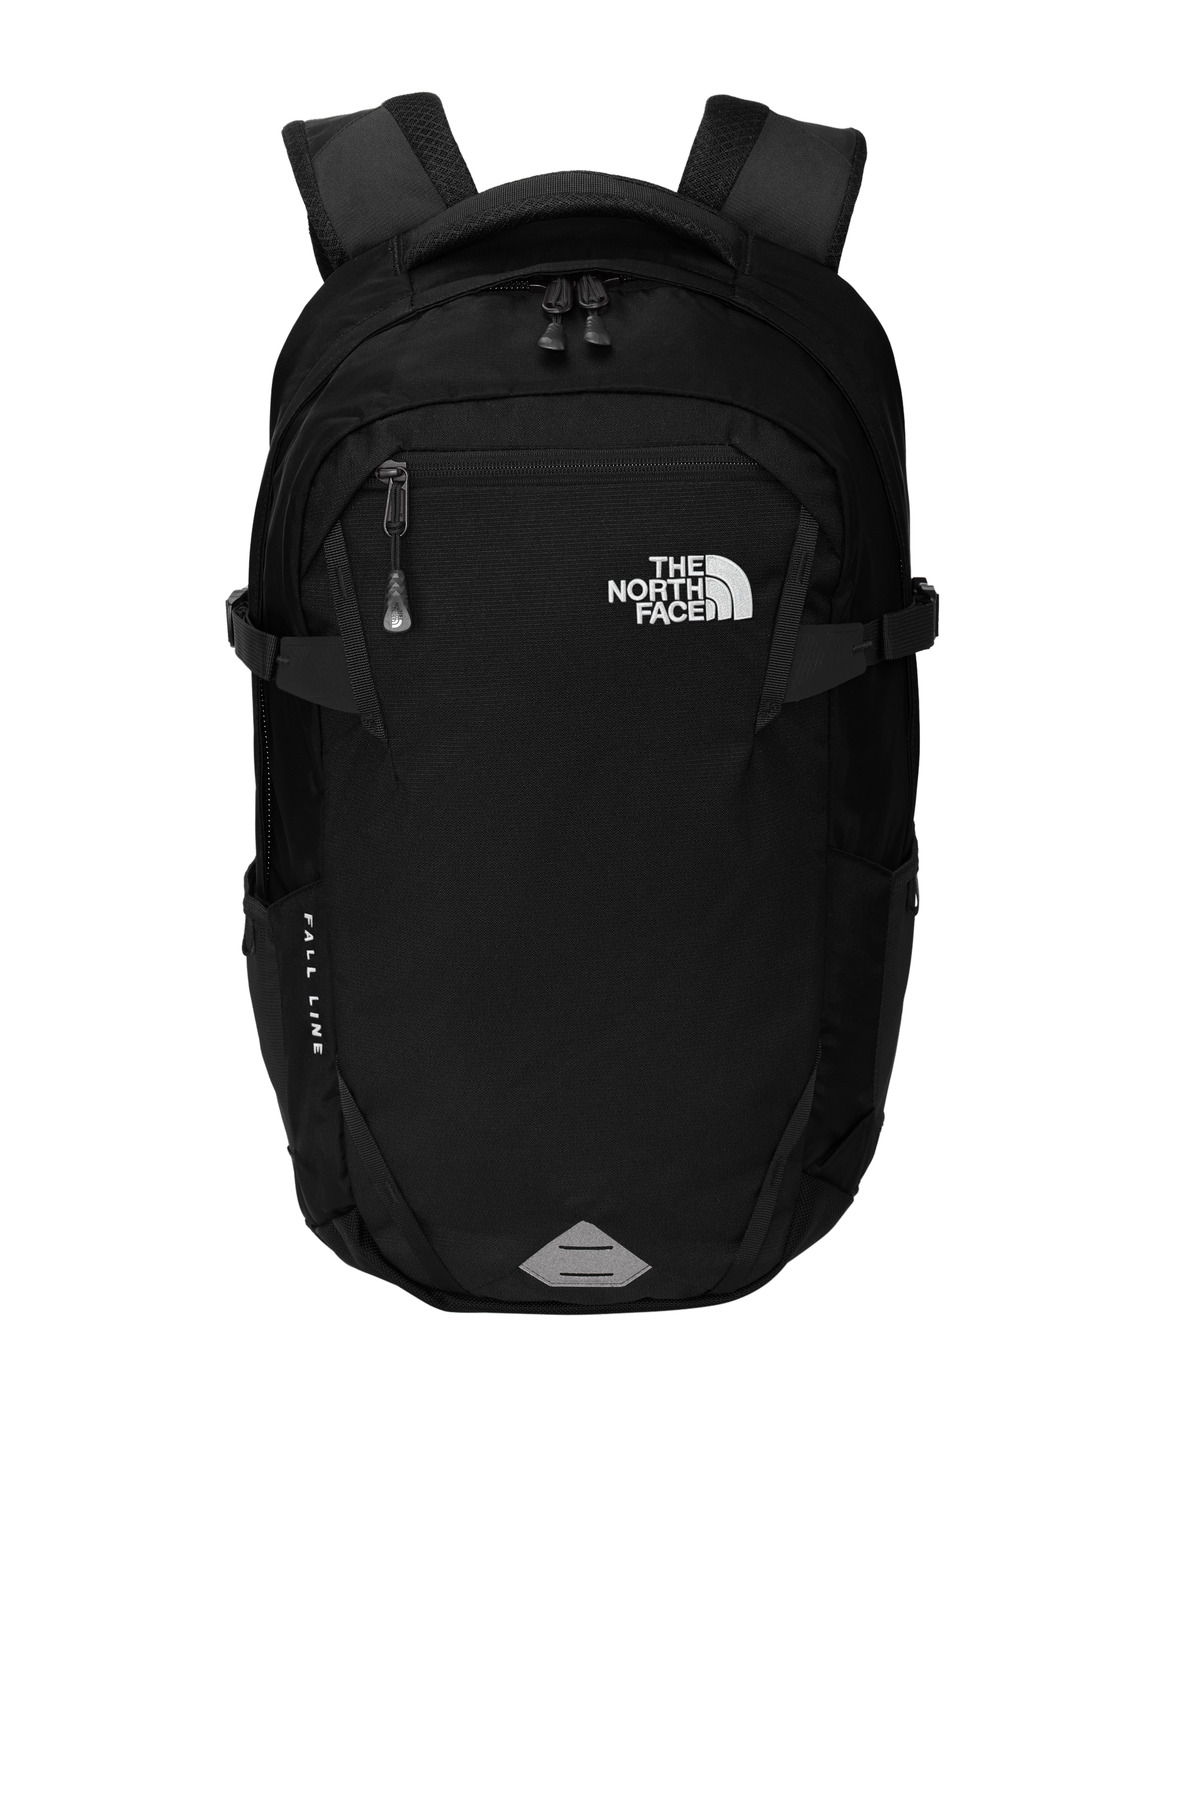 The North Face Fall Line Backpack-